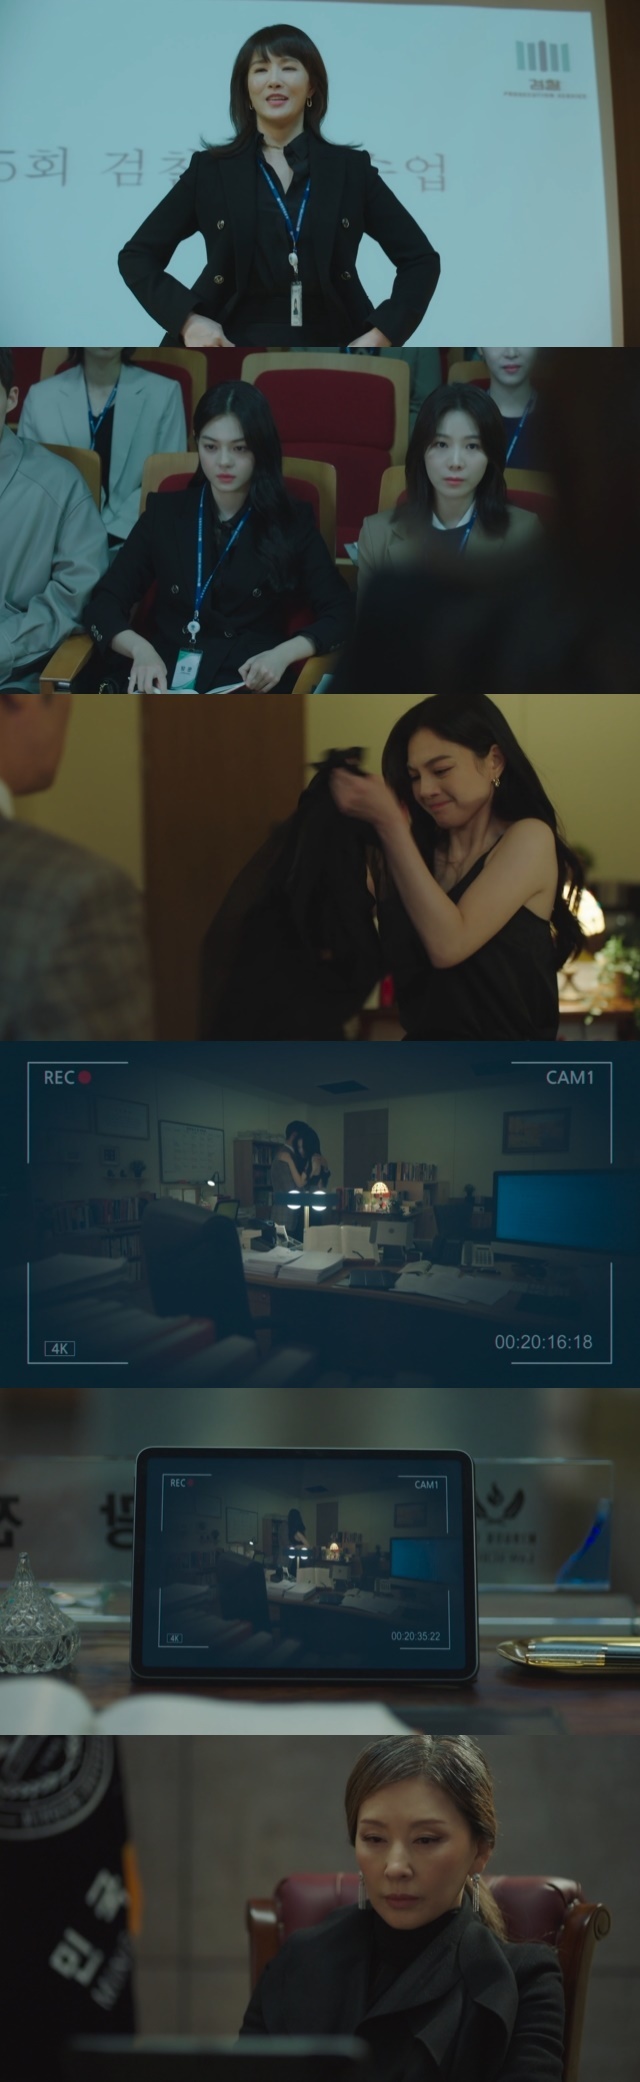 Lee Mi-sook was shocked by the fact that he knew the affair of his son-in-law, Ahn Jae-wook and his student Kim Myung-ji.In the second episode of the JTBC Saturday drama The Empire of Law (played by Oh Ga-gyu and directed by Yoo Hyun-ki), broadcast on September 25, deception continued about Kim Sun-a, wife of Ahn Jae-wook.Han Hye-ryul emerged as the presidential candidate in the poll, and Han Hye-ryul was attacked by Han Hye-ryul in various places due to the fact that he was touching his sisters in-law and chaebols main group.Han Hye-ryul asked his mother, Lee Mi-sook, for help, and Ham Kwang-jeon advised, Please talk to Professor Na rather than me.In the meantime, Na Geun-woo was in the process of Affair.He had a secret affair in the faculty room as well as a luxury suit for law school practice to Hong Nan-hee (Kim Myung-ji).When I was at home, Na Geun-woo enjoyed the love of Hong Nan-hee.In the meantime, there was a problem. Na Geun-woo accidentally bought a suit that was Gifted to Hong Nan-hee.Even Han Hye-ryul was wearing the clothes and went to a special lecture on law school practice attended by Hong Nan-hee.Han Hye-ryul, who was on the podium, said, It is a costume I asked Professor Na because it is a special day today, but it is hard to lecture in front of students.Hong Nan-hee thought that Na Geun-woo had the same clothes Gifted to her and her main home, Han Hye-ryul, who was the Affair counterpart, and could not erase the unpleasant expression.Then, in the lecture, he asked Han Hye-ryul a meaningful question, What do you think about the lawyers who ignore all rational objective circumstances and make a conclusion and stand on the side of those with money and power and abandon justice and justice?Han Hye-ryul said, It is right to pay the responsibility and the price accordingly. Hong Nan-hee said, Does that mean that such lawyers are god George?As soon as the lecture was over, Hong Nan-hee came into Na Geun-woos professors office, threw his clothes off, tore them with a kilo, and cut them.I do not know how dirty I felt, said Hong Nan-hee, who said, Do not you love me? Tell me you love me?Na Geun-woo said, I love you to Hong Nan-hee and comforted her in her arms.